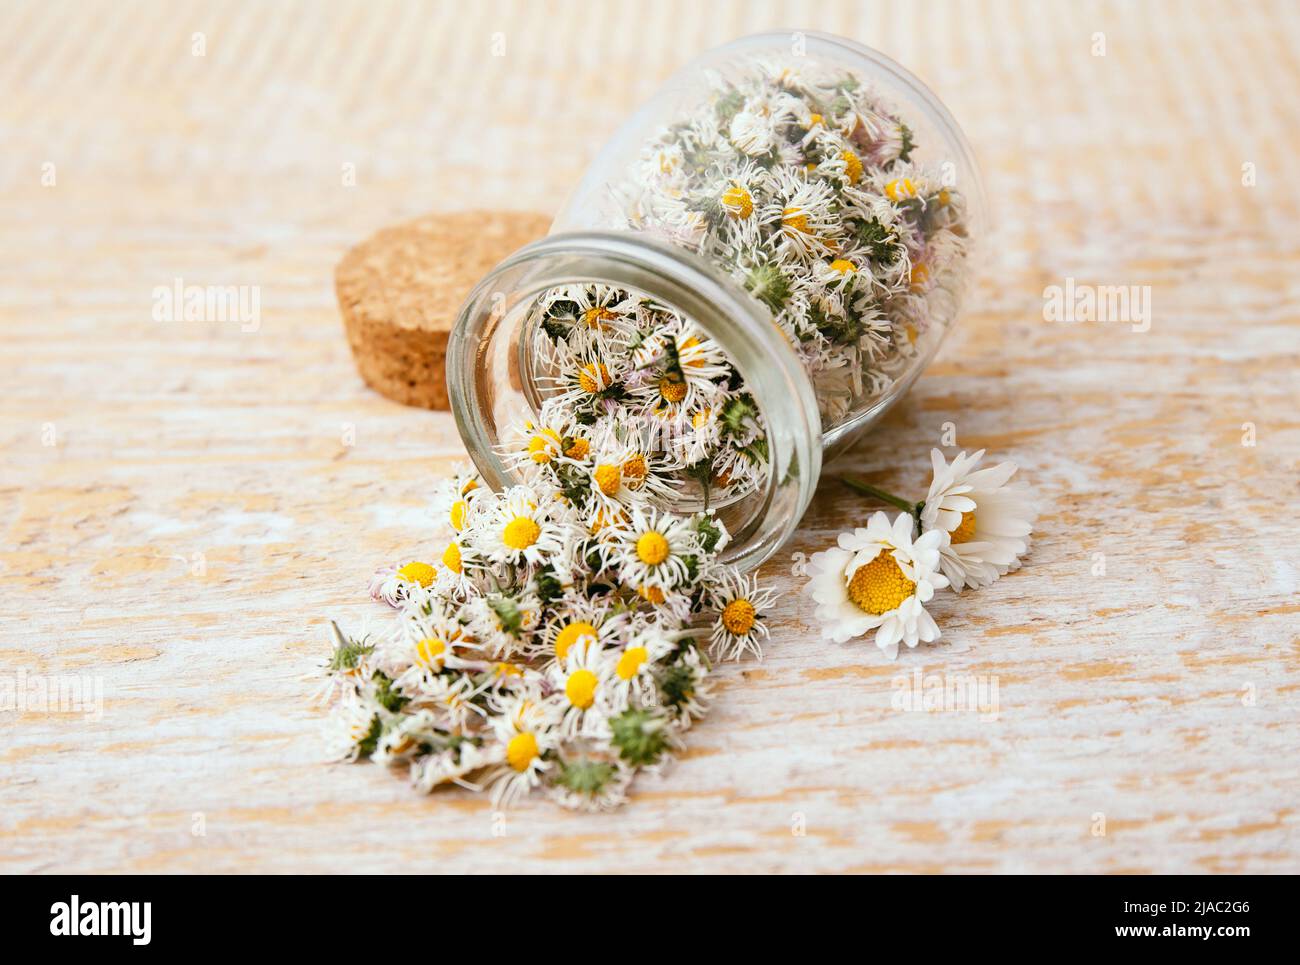 Dried herbal medicinal plant Common Daisy, also known as Bellis Perennis. Dry flower blossoms in glass jar and wood spoon, ready for making herbal tea. Stock Photo